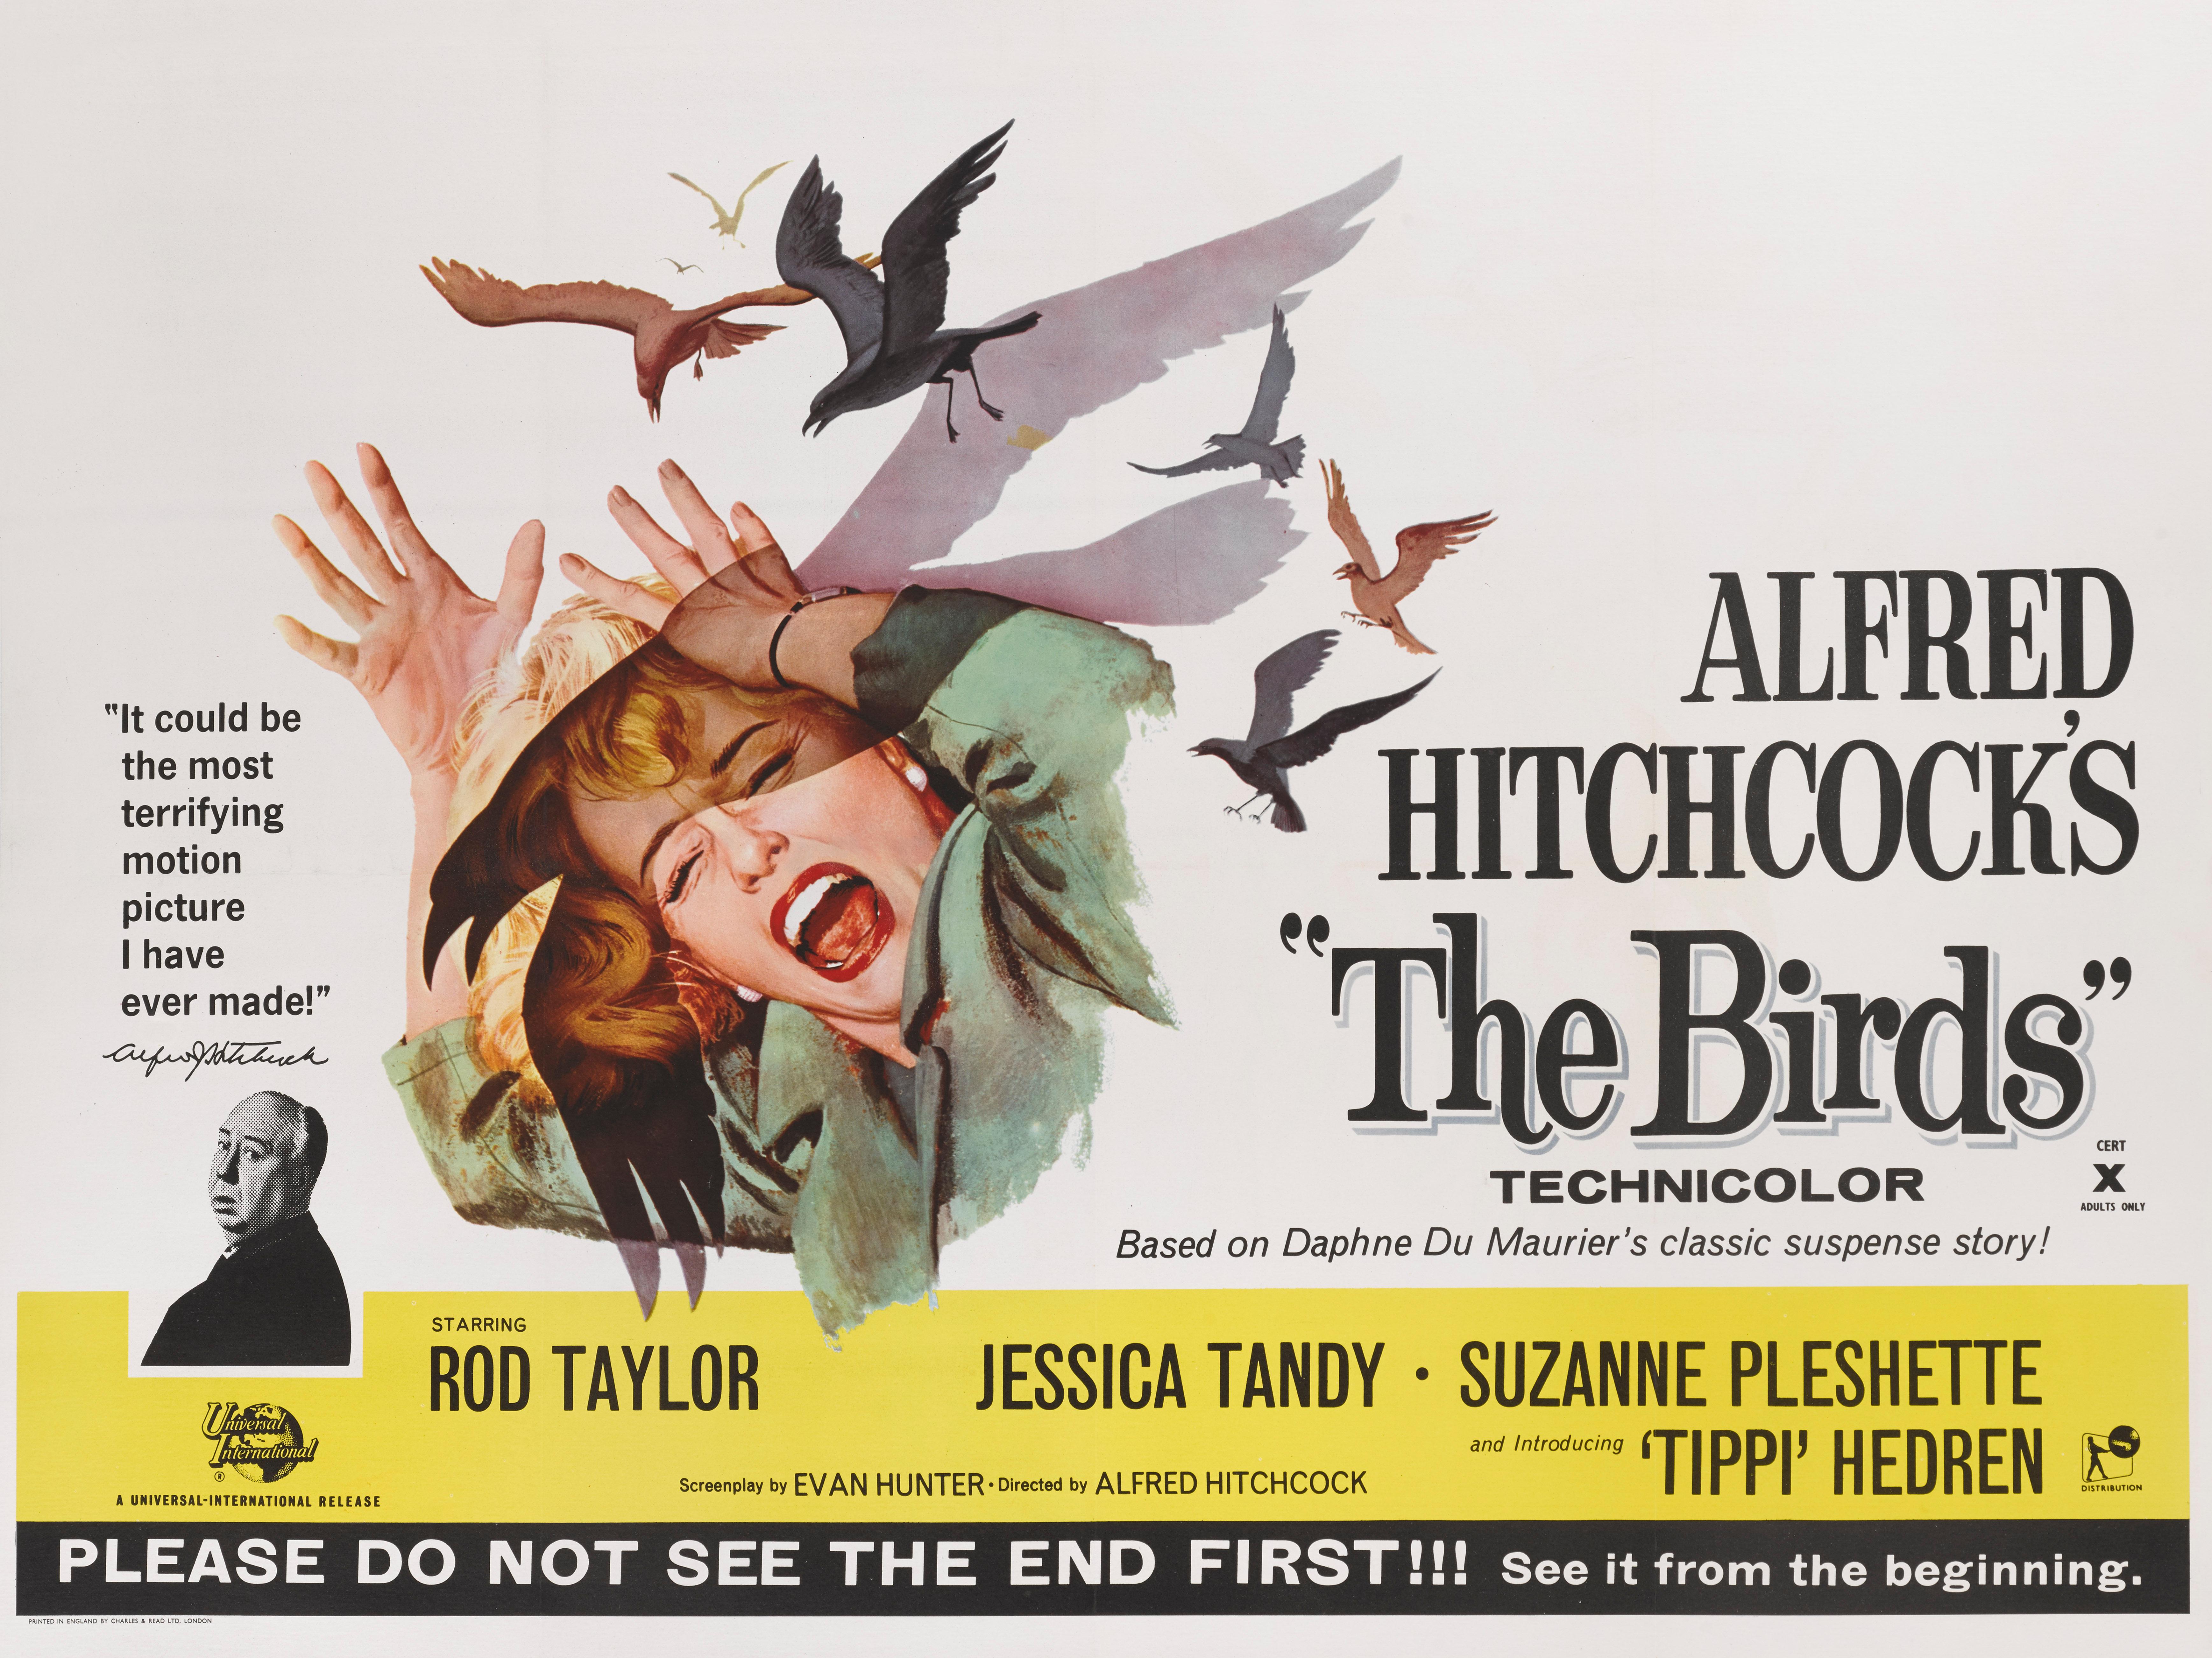 Original British film poster for Alfred Hitchcock's The Birds 1963
Starring Tippi Hedren. The poster is conservation linen backed and would be shipped rolled in a strong tube.